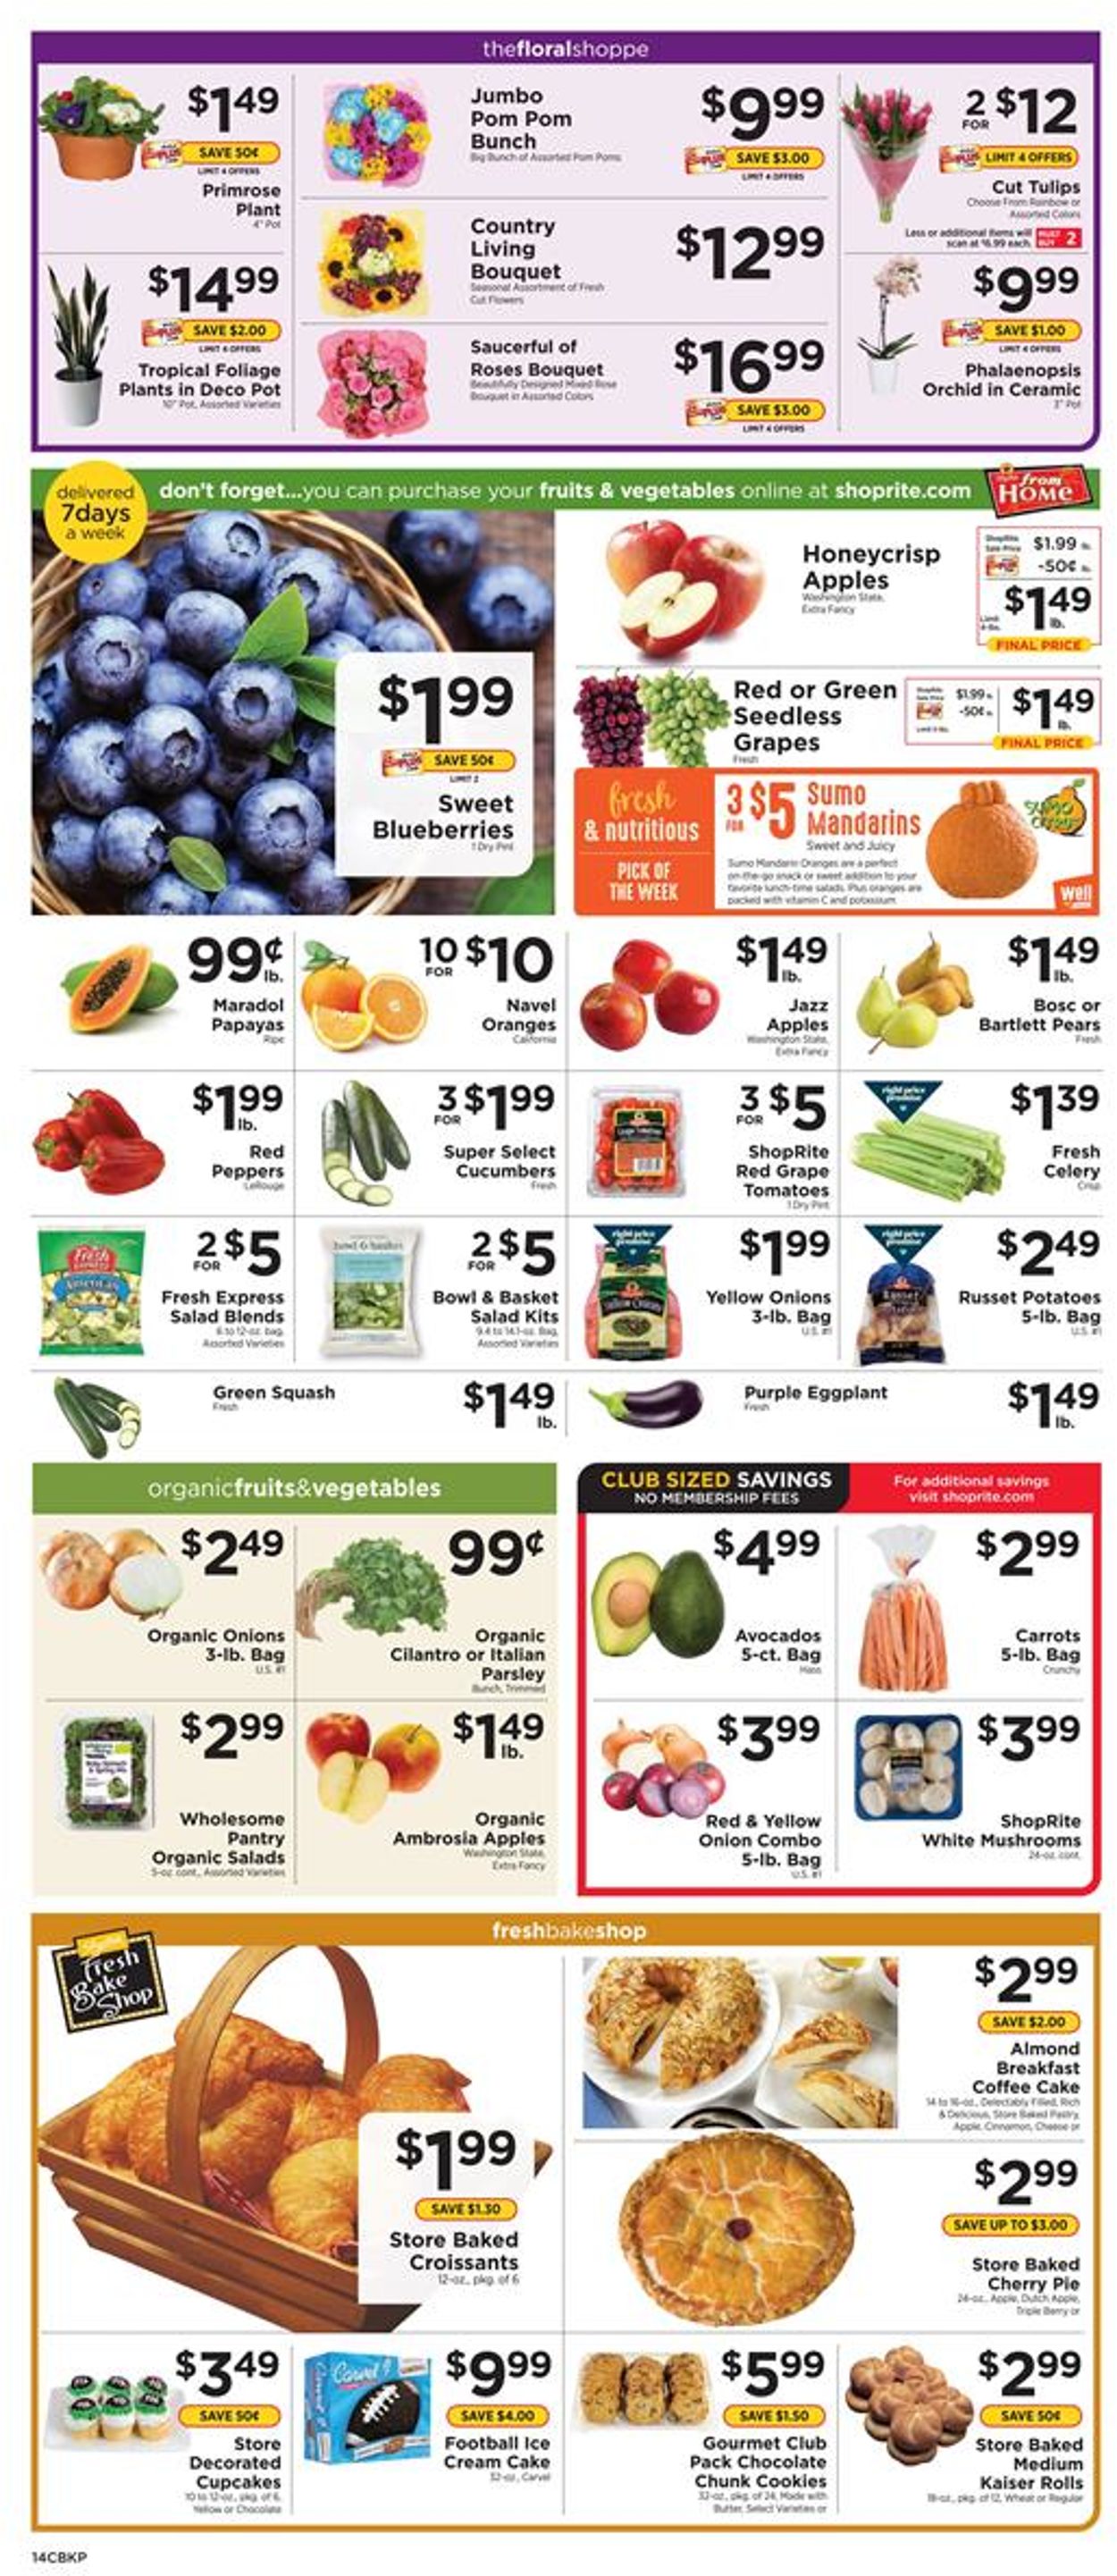 ShopRite Current weekly ad 01/19 - 01/25/2020 [14] - frequent-ads.com